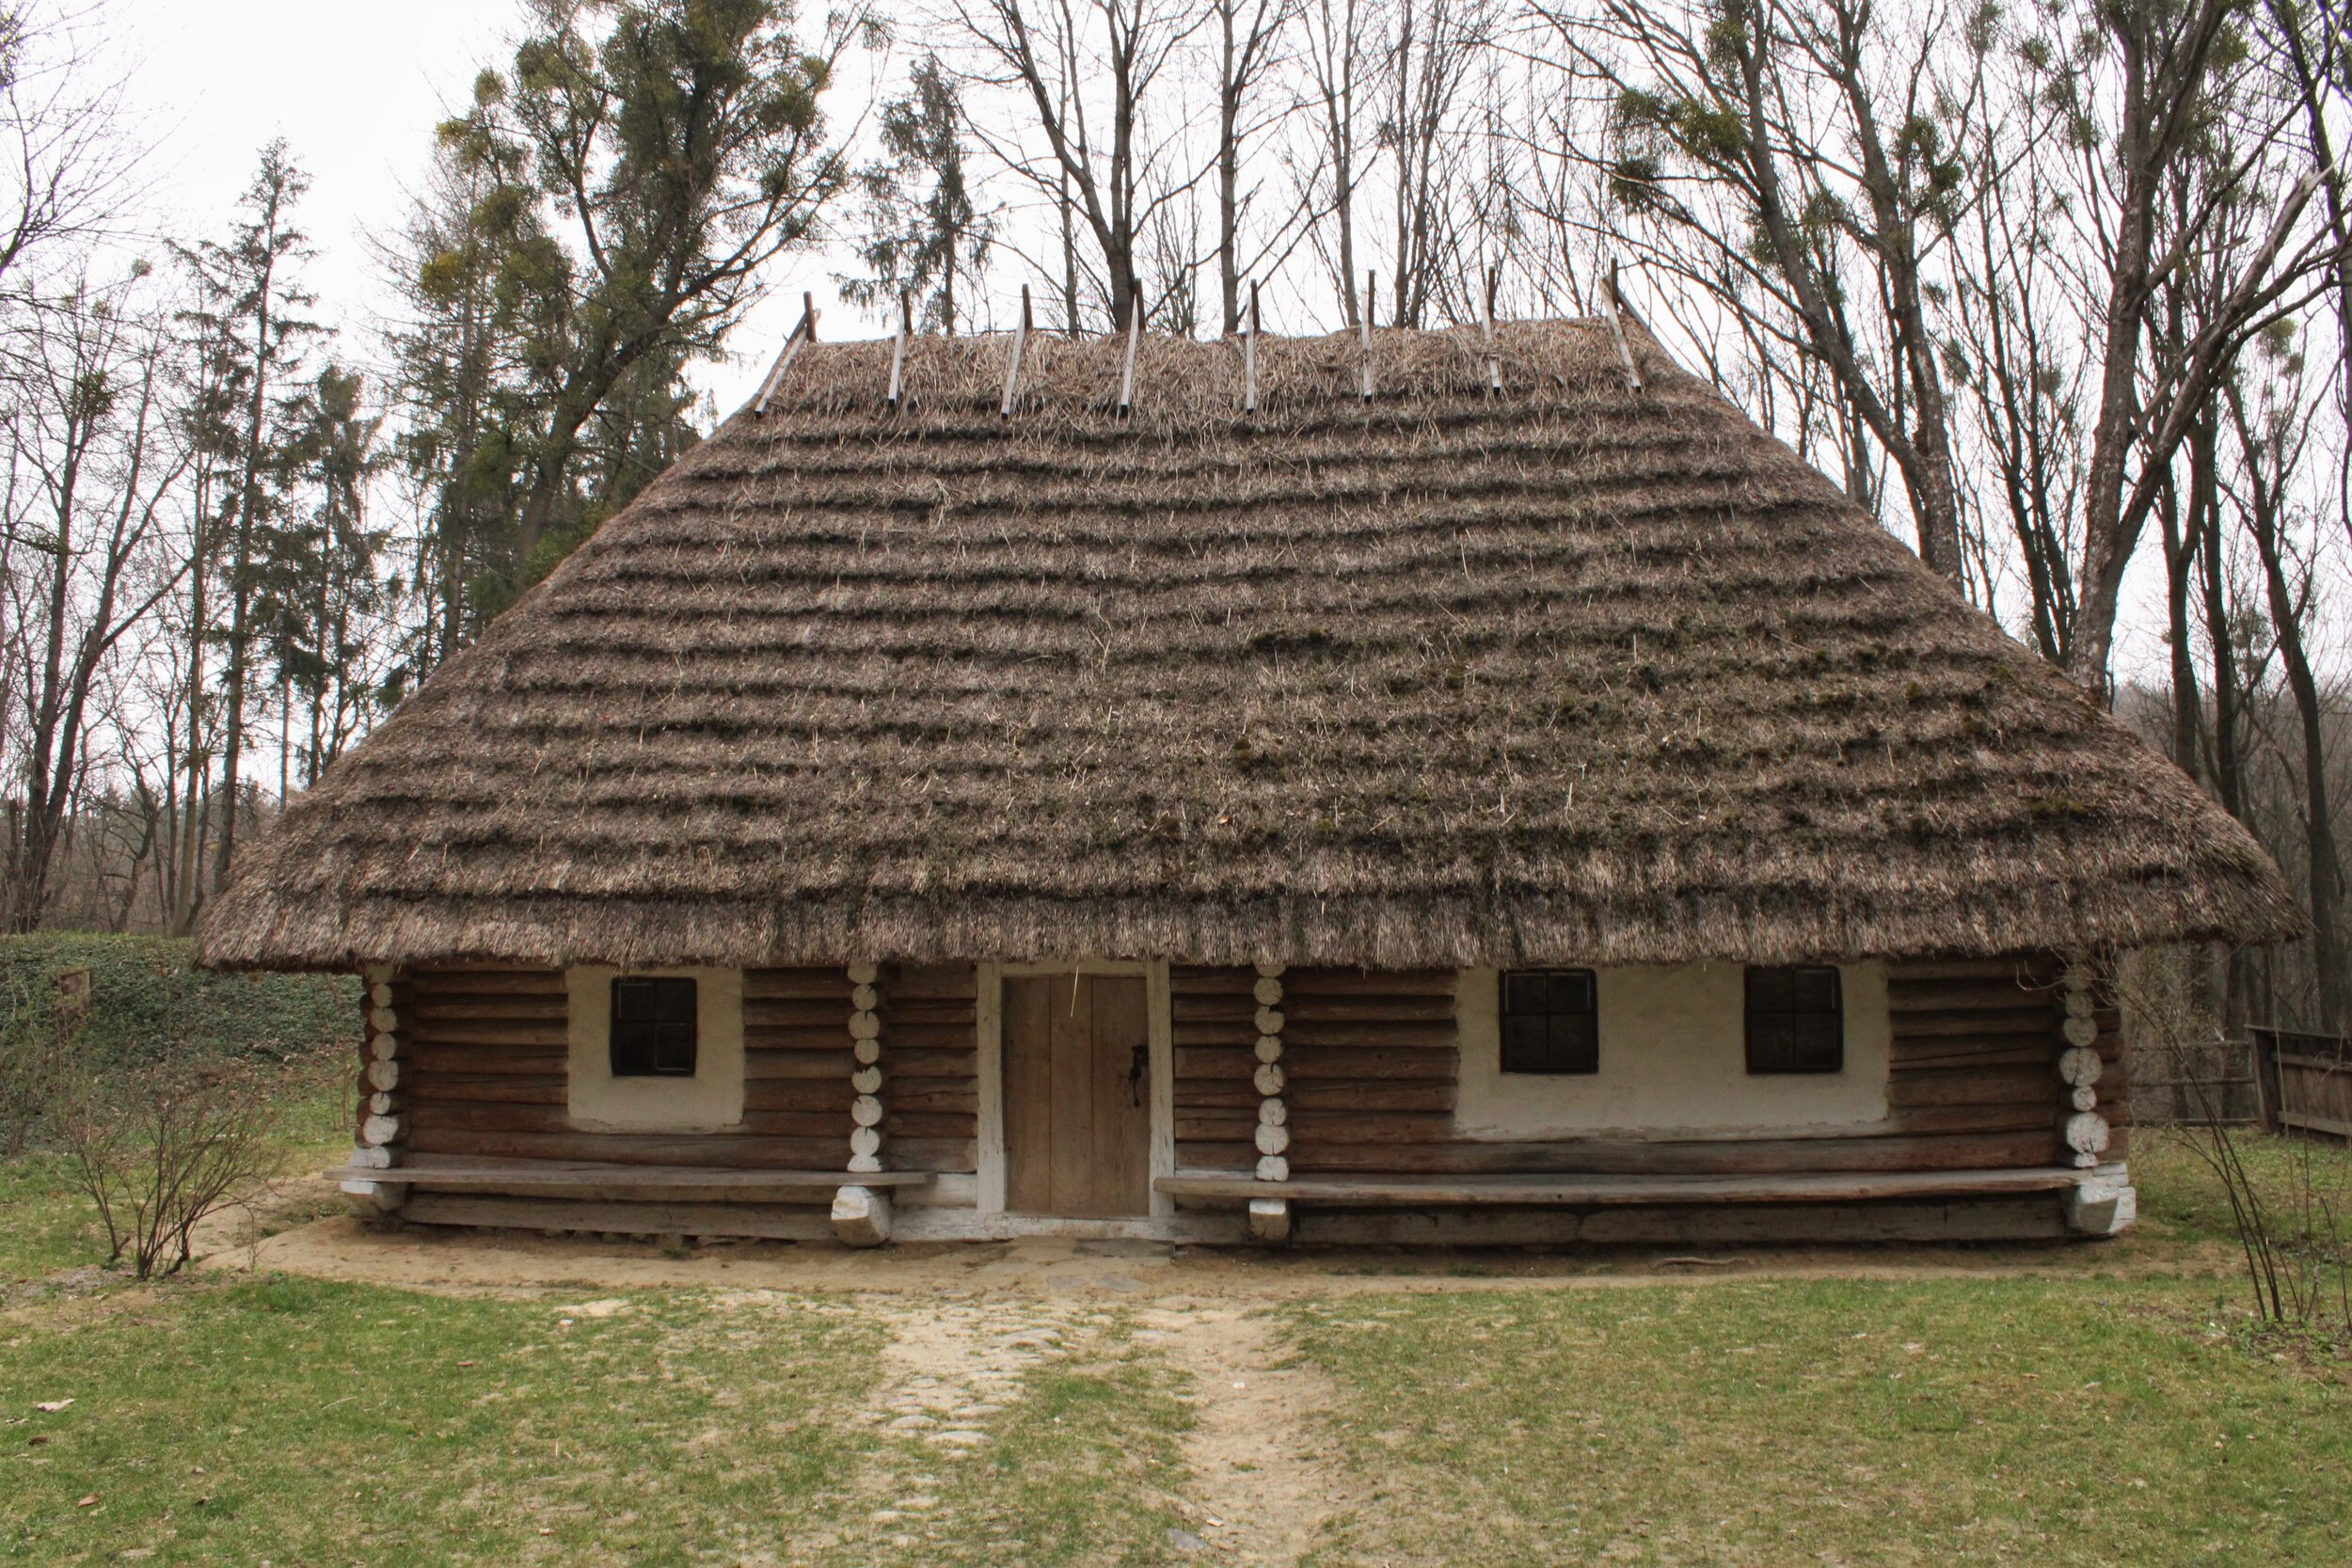   L’VIV, Ukraine. April 2021 PICTURED:  This more modern country building was built in the beginning of the 20th century by the Boykos People. 